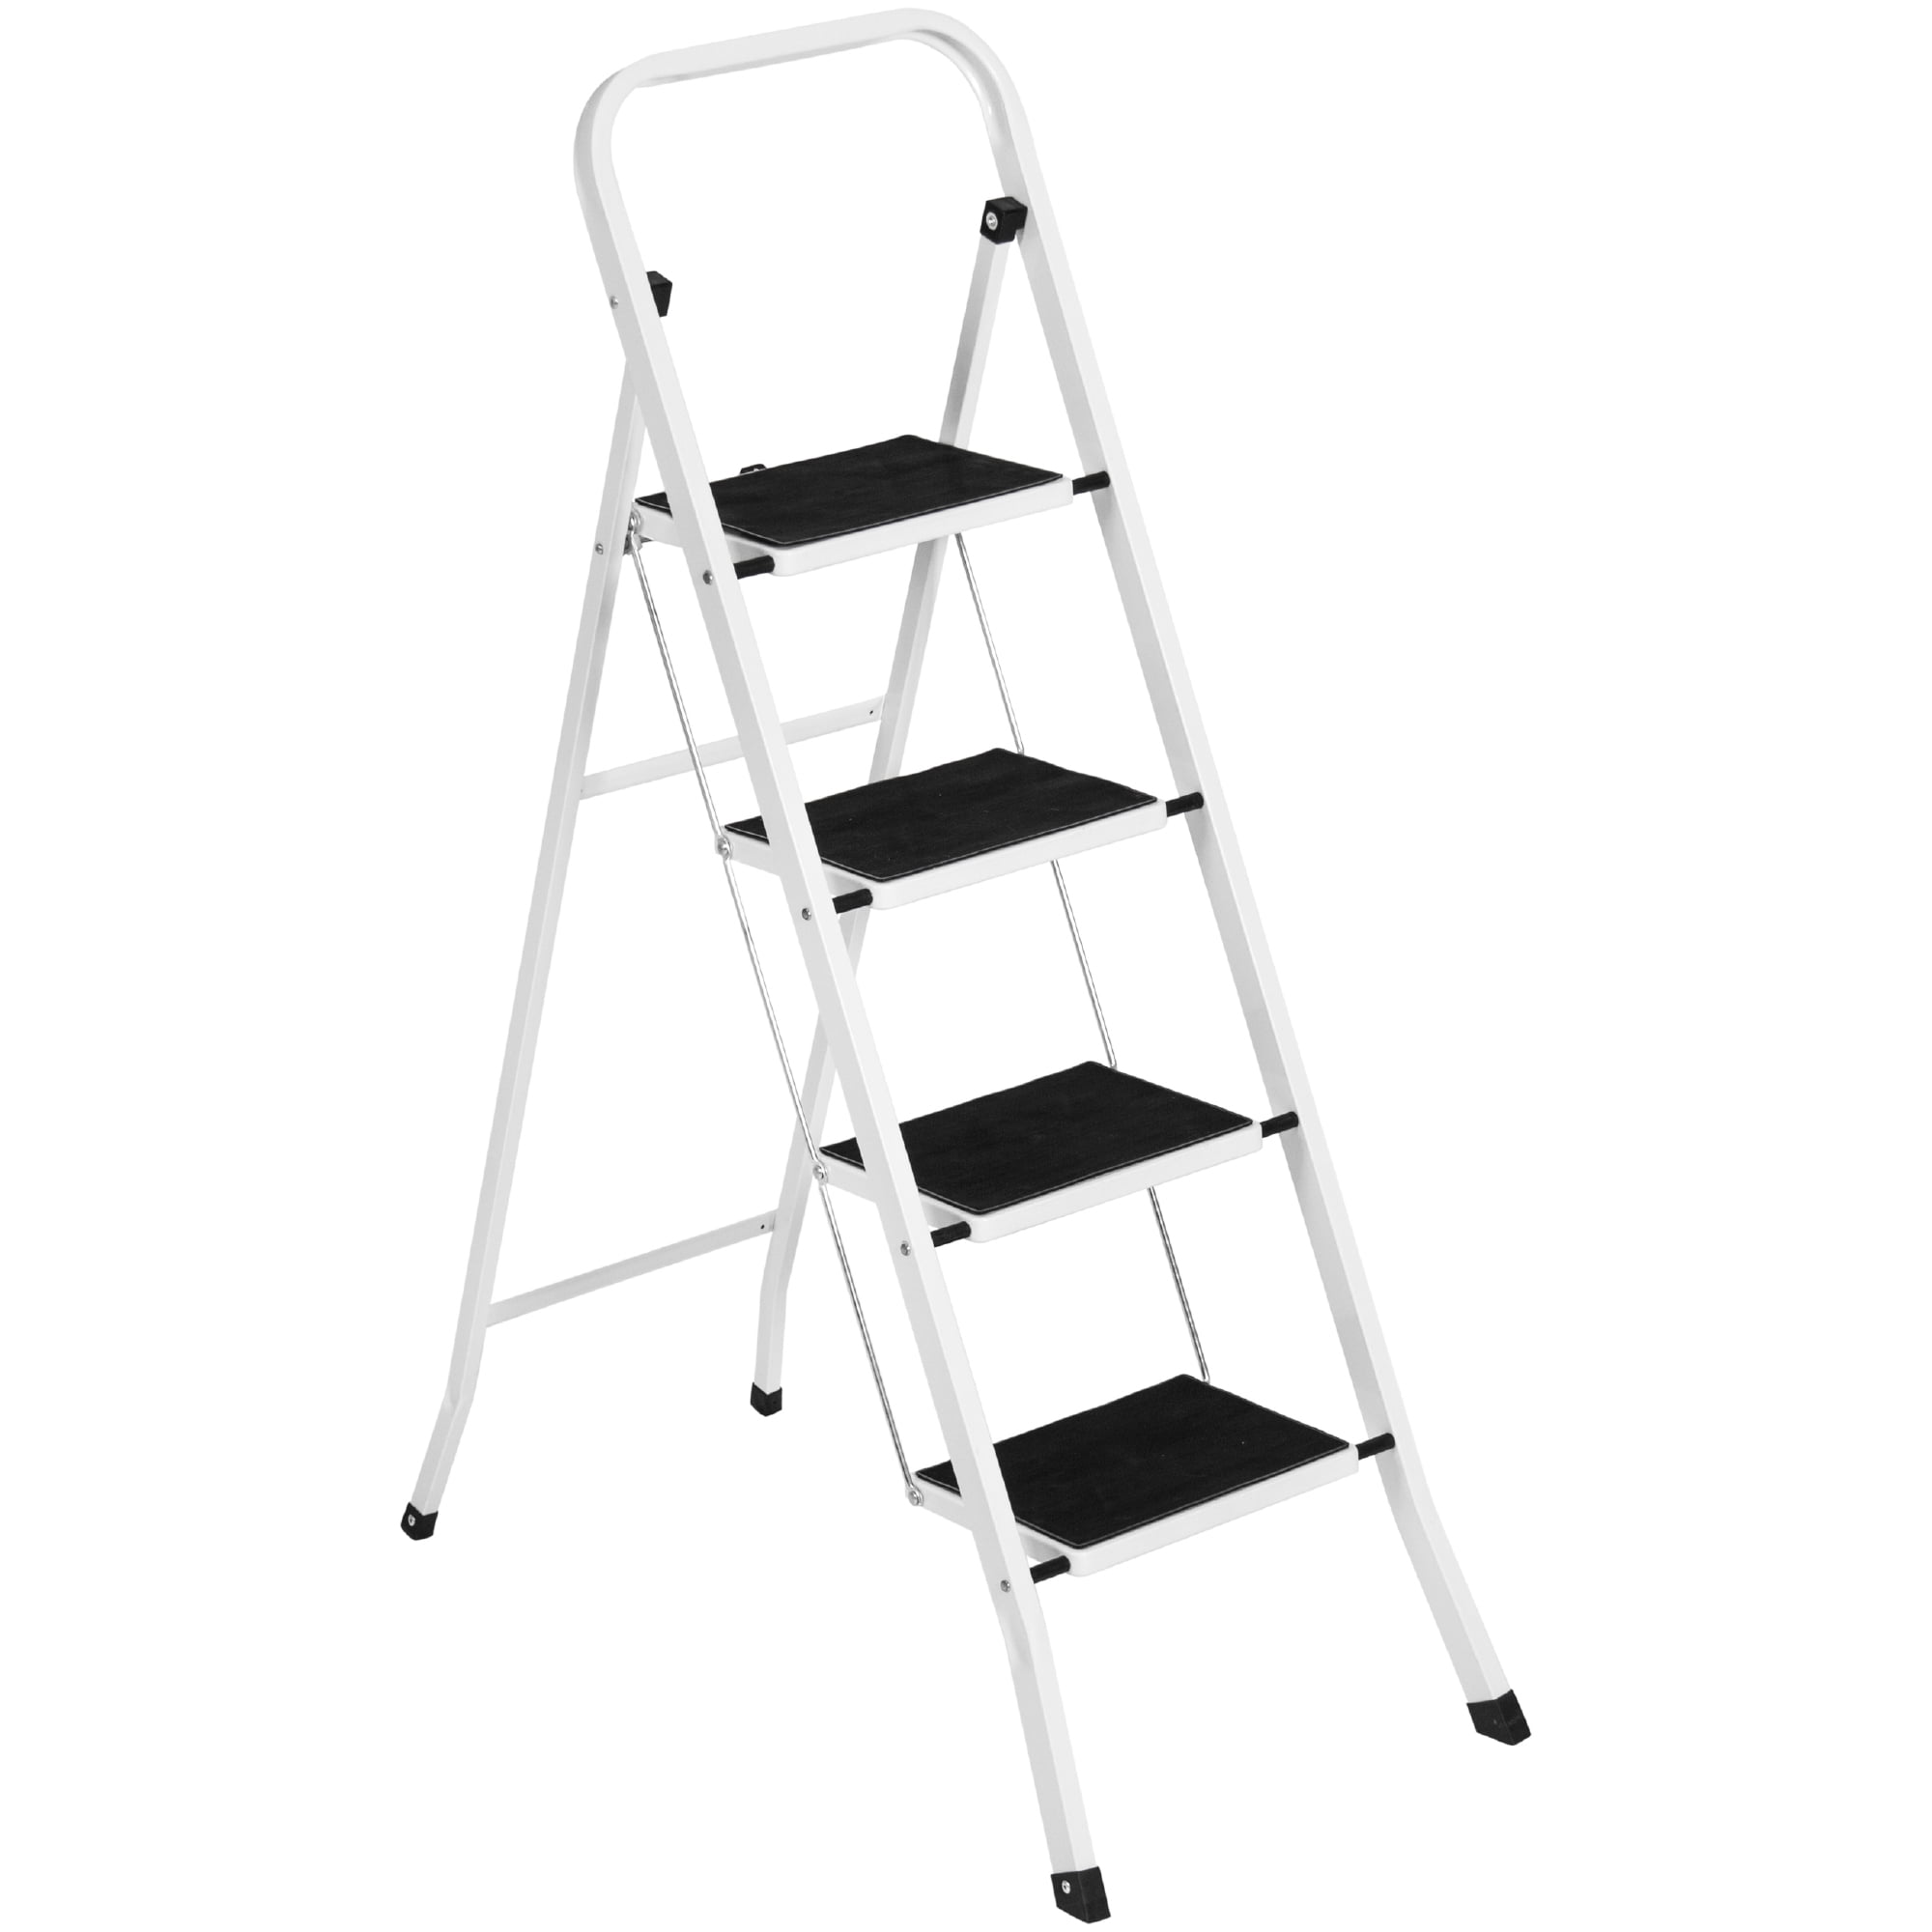 4 Step Ladder With Safety Handrail Anti-Slip Rubber Mat Tread Steel Foldable DIY 